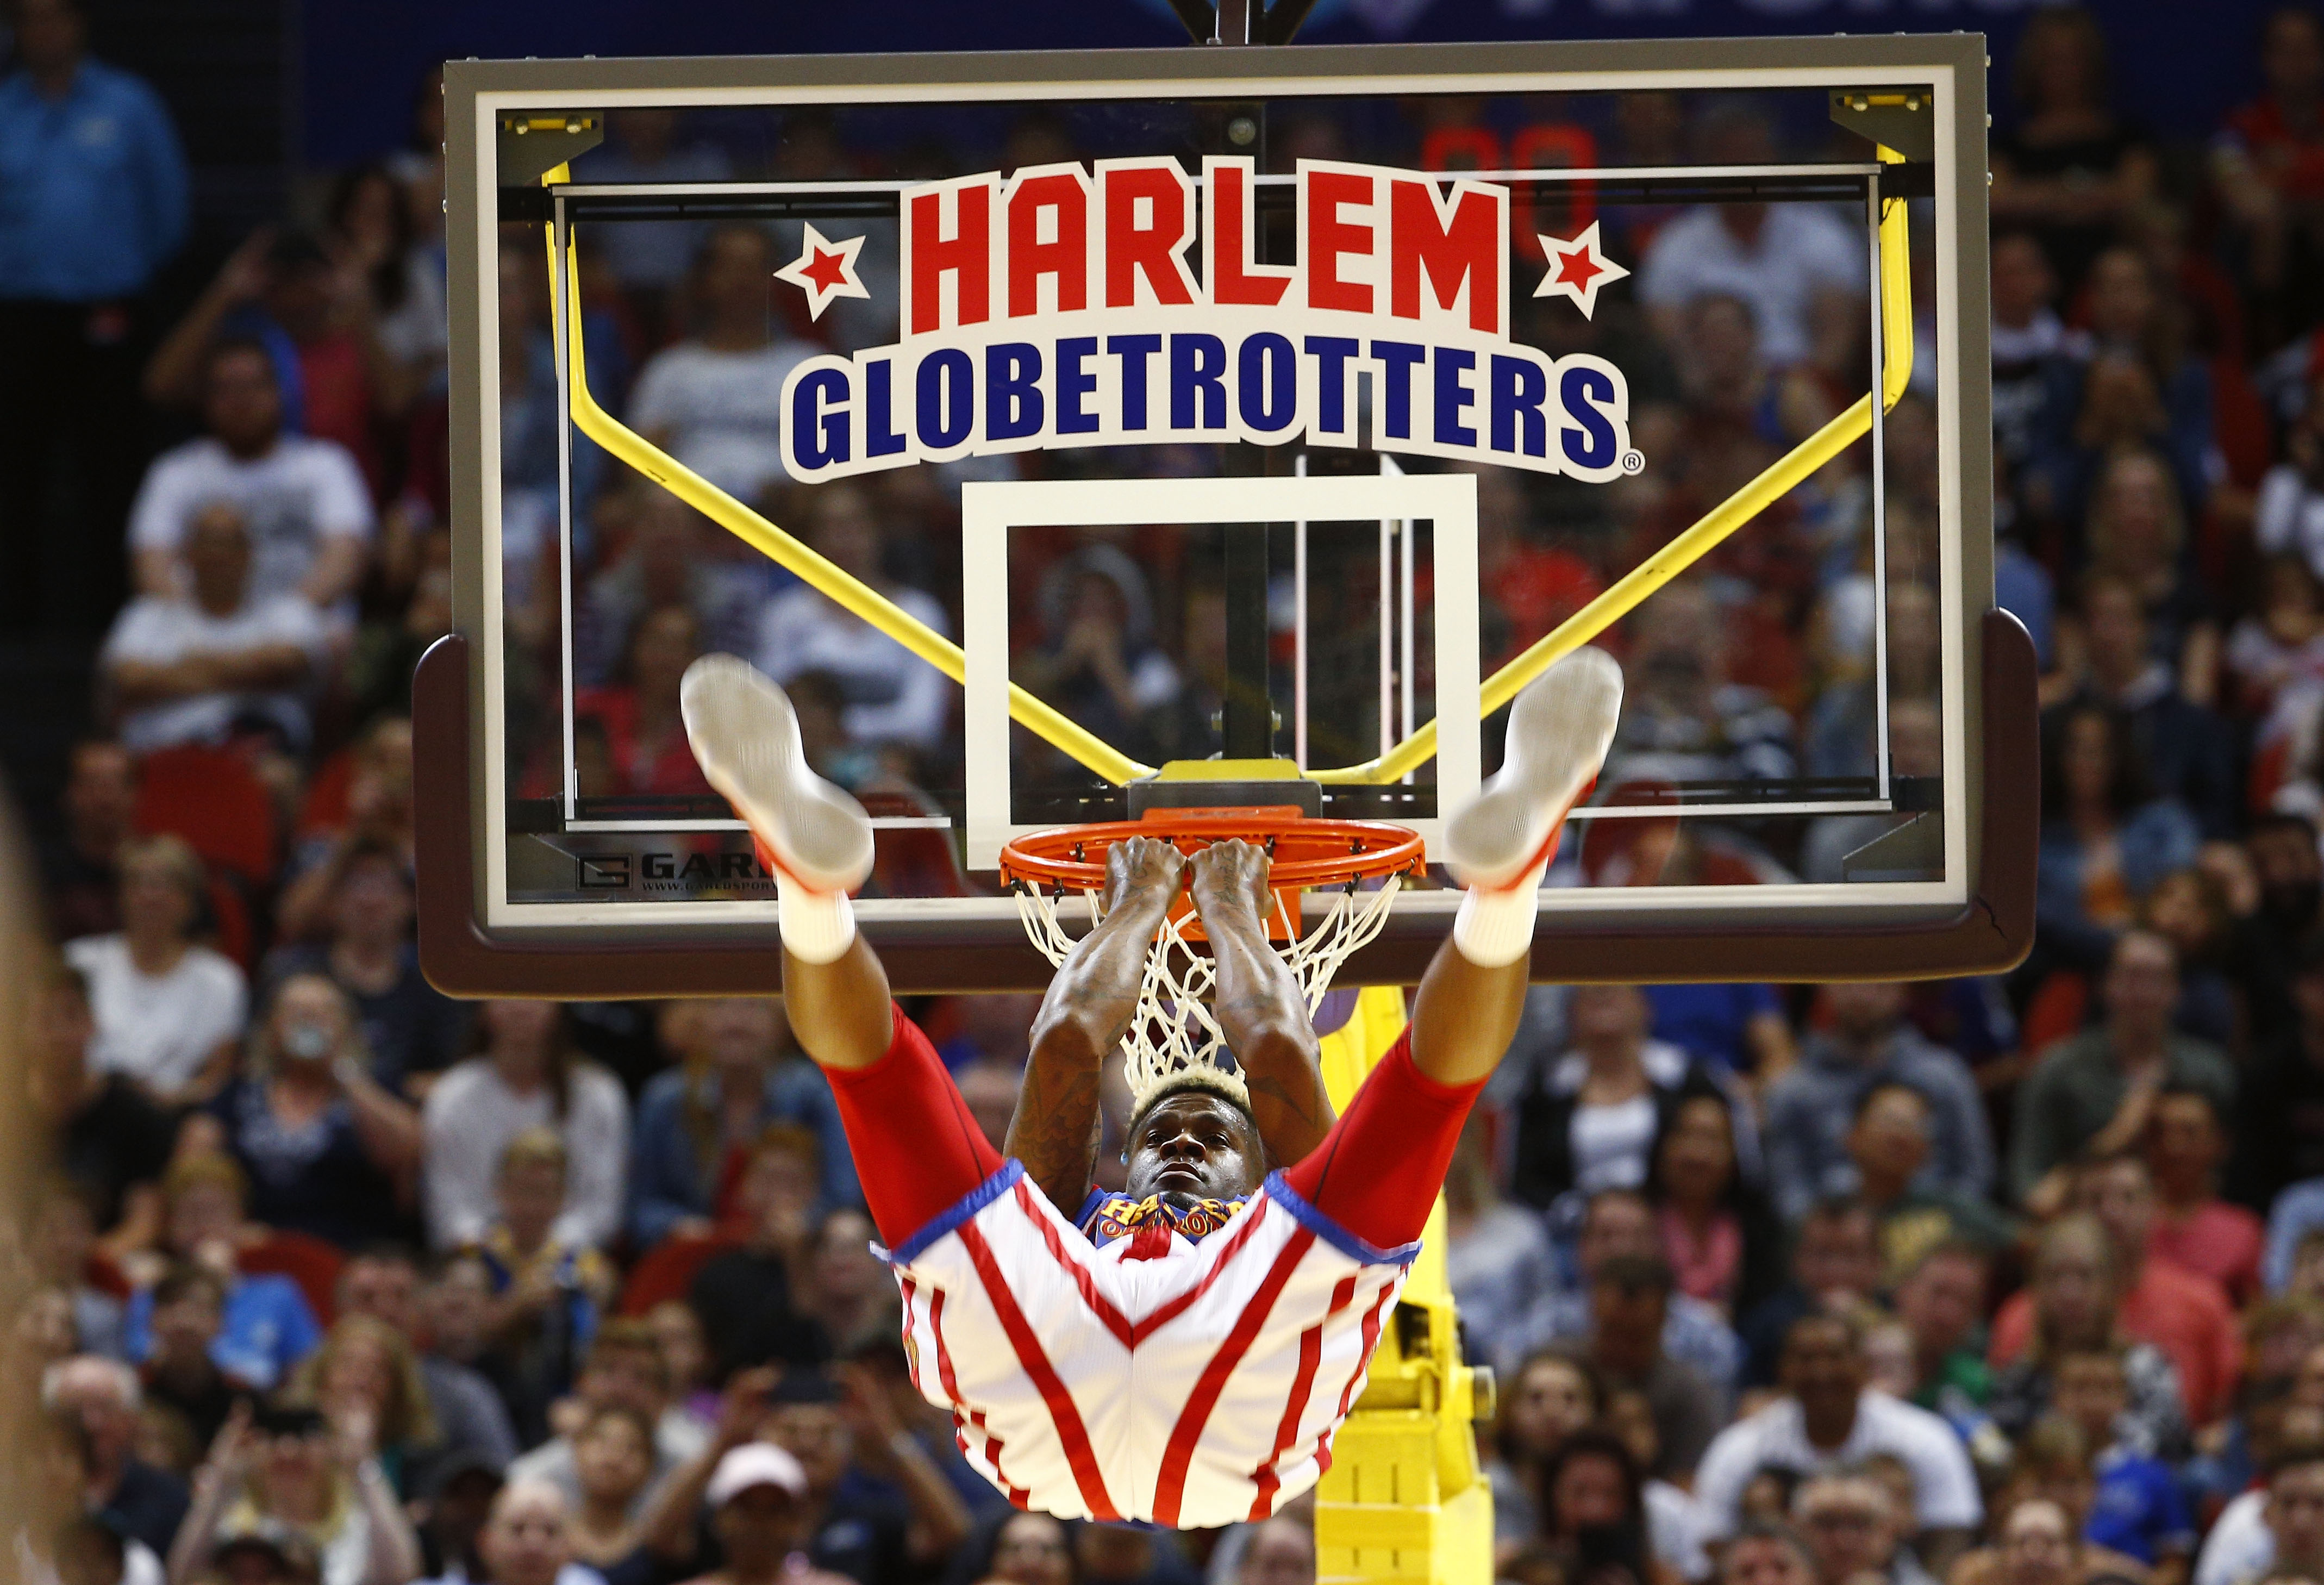 The Harlem Globetrotters Upset of the Lakers Changed Basketball Forever